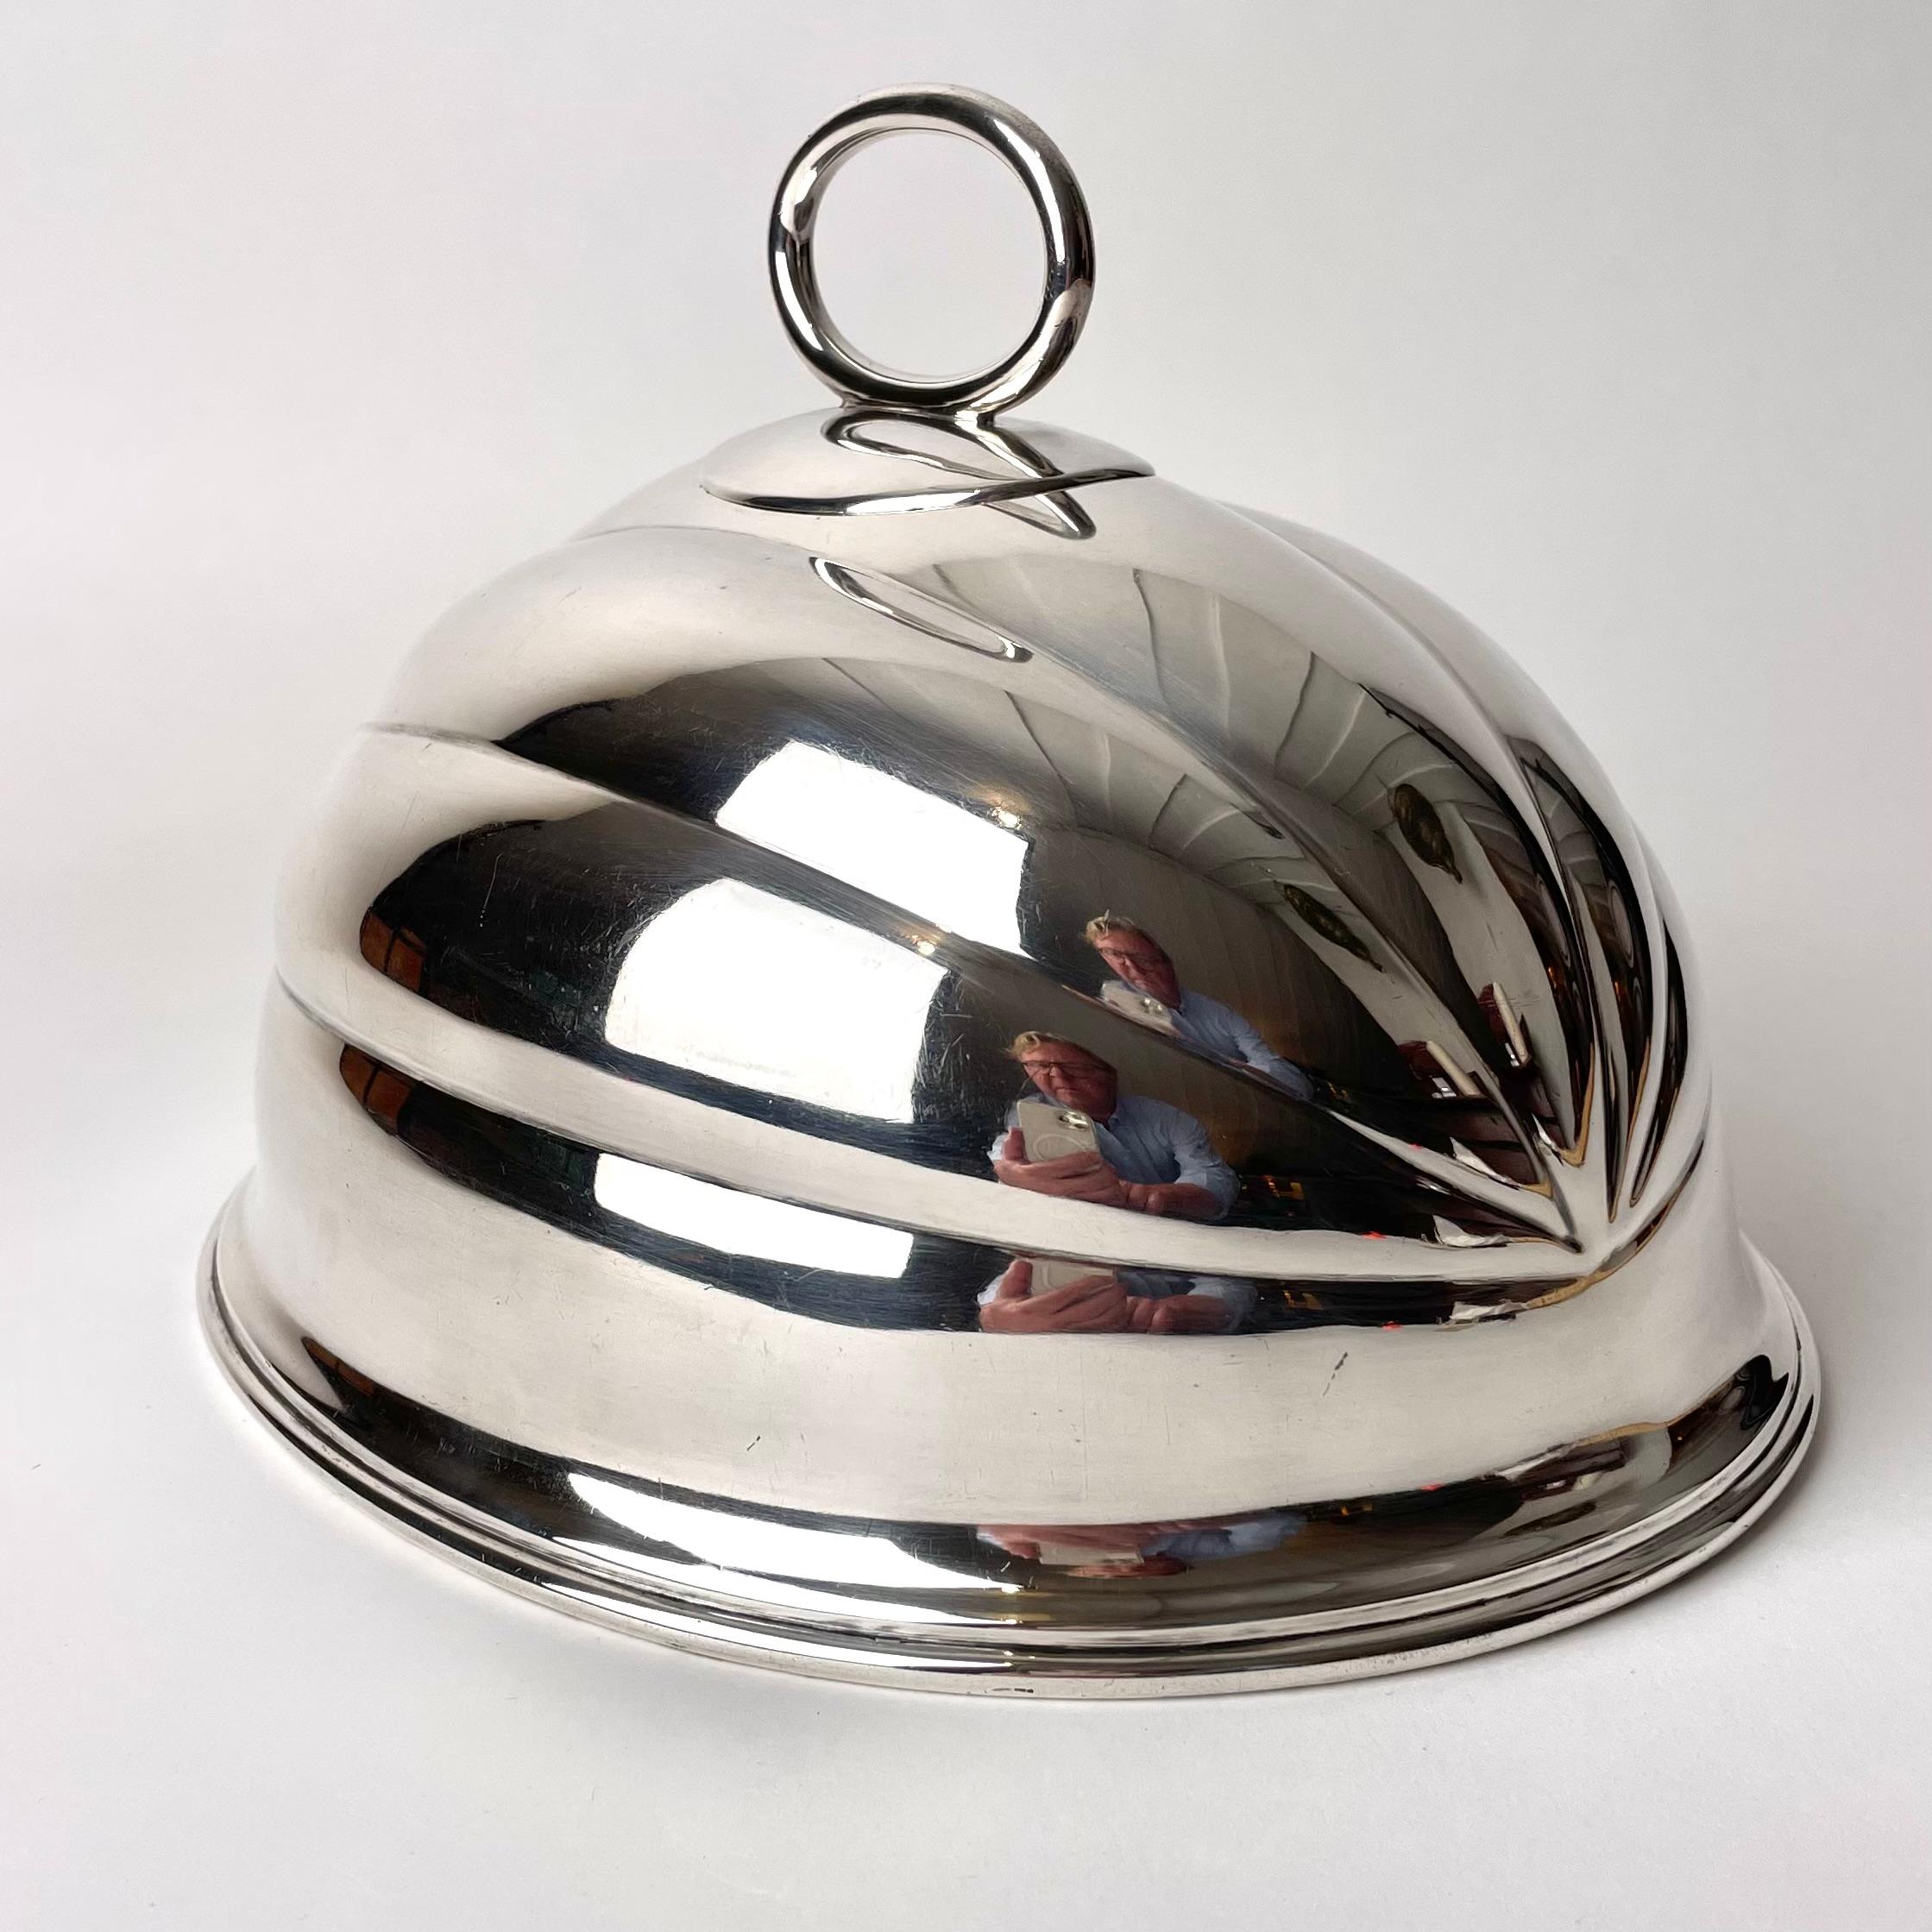 Dome Cover Cloche in Sheffield Plate, Late 19th Century England by Mappin & Webb.

This expertly crafted cloche in Sheffield plate was manufactured by English luxury and silver working company Mappin & Webb. The company has long held Royal Warrants,